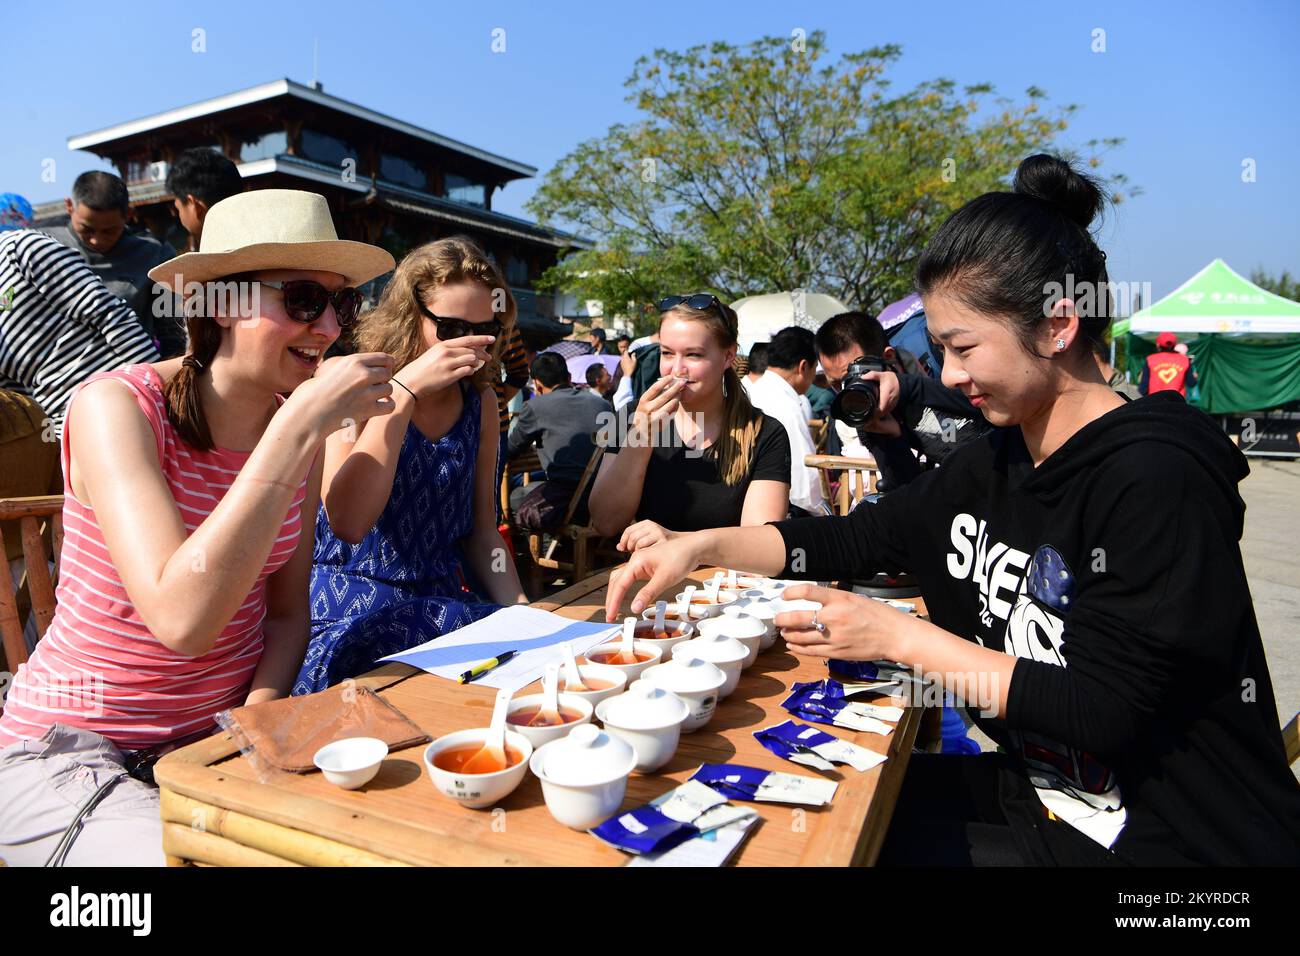 WUYISHAN, Dec. 2, 2022 (Xinhua) -- Foreign visitors taste Wuyi rock tea at a tea tasting competition in Wuyishan, southeast China's Fujian Province, Oct. 28, 2017. Wuyishan, the hometown of rock tea, boasts a wide range of rock tea varieties. The making technique of Wuyi rock tea, a special oolong variety with a particularly roasted taste and floral and fruity aroma, is comprised of more than 10 processing procedures including tea harvesting, withering, fixation, twisting, drying and so on. Inherited and developed with a long history, the making technique of Wuyi rock tea is liste Stock Photo